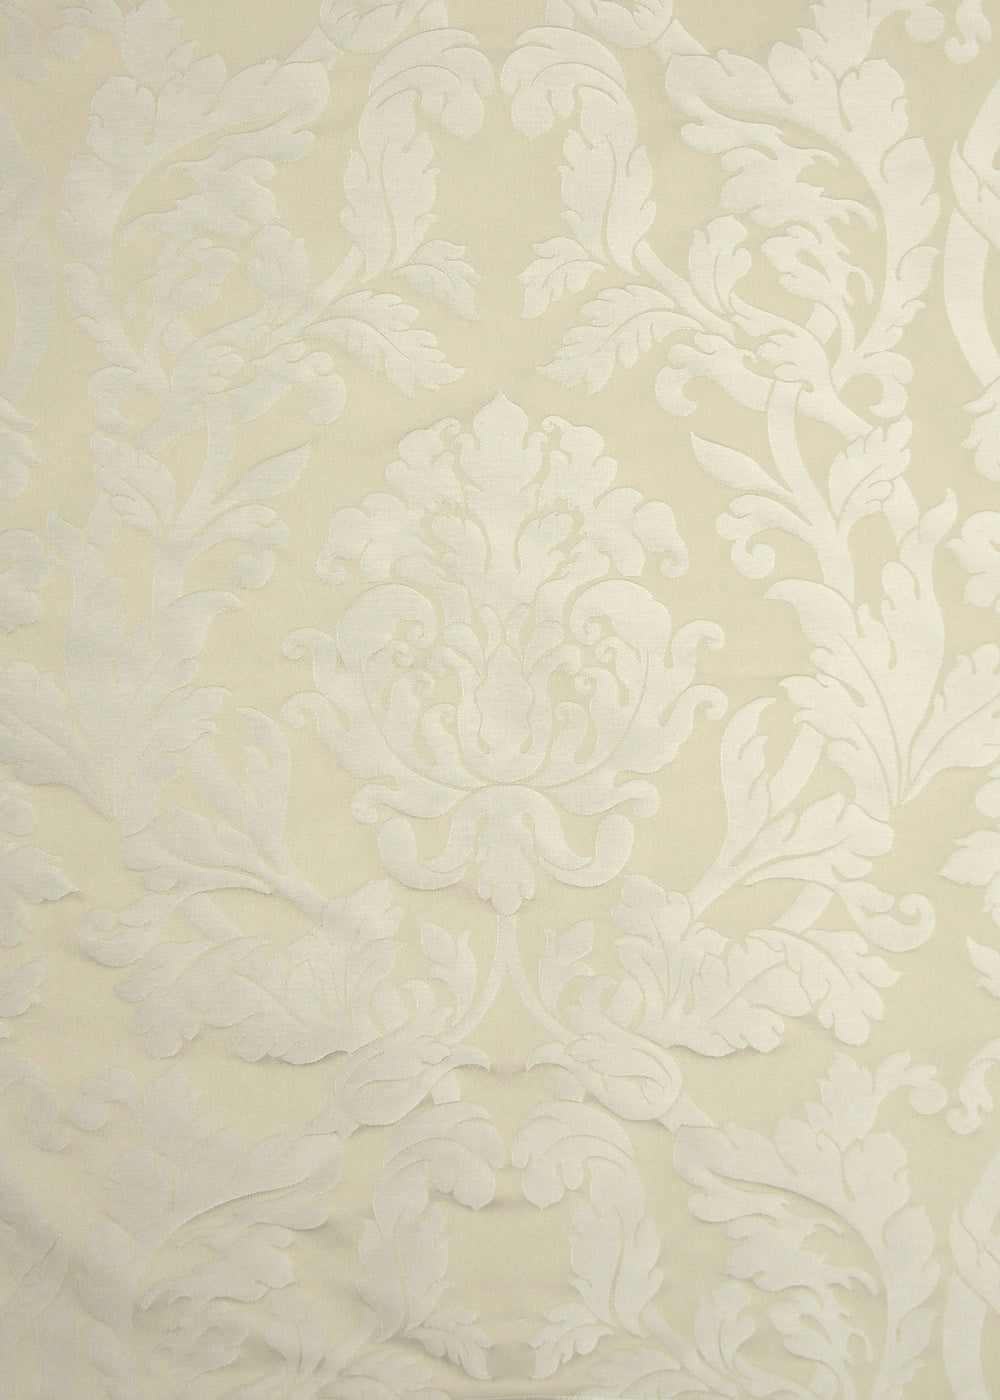 light beige satin fabric with a subtle damask pattern